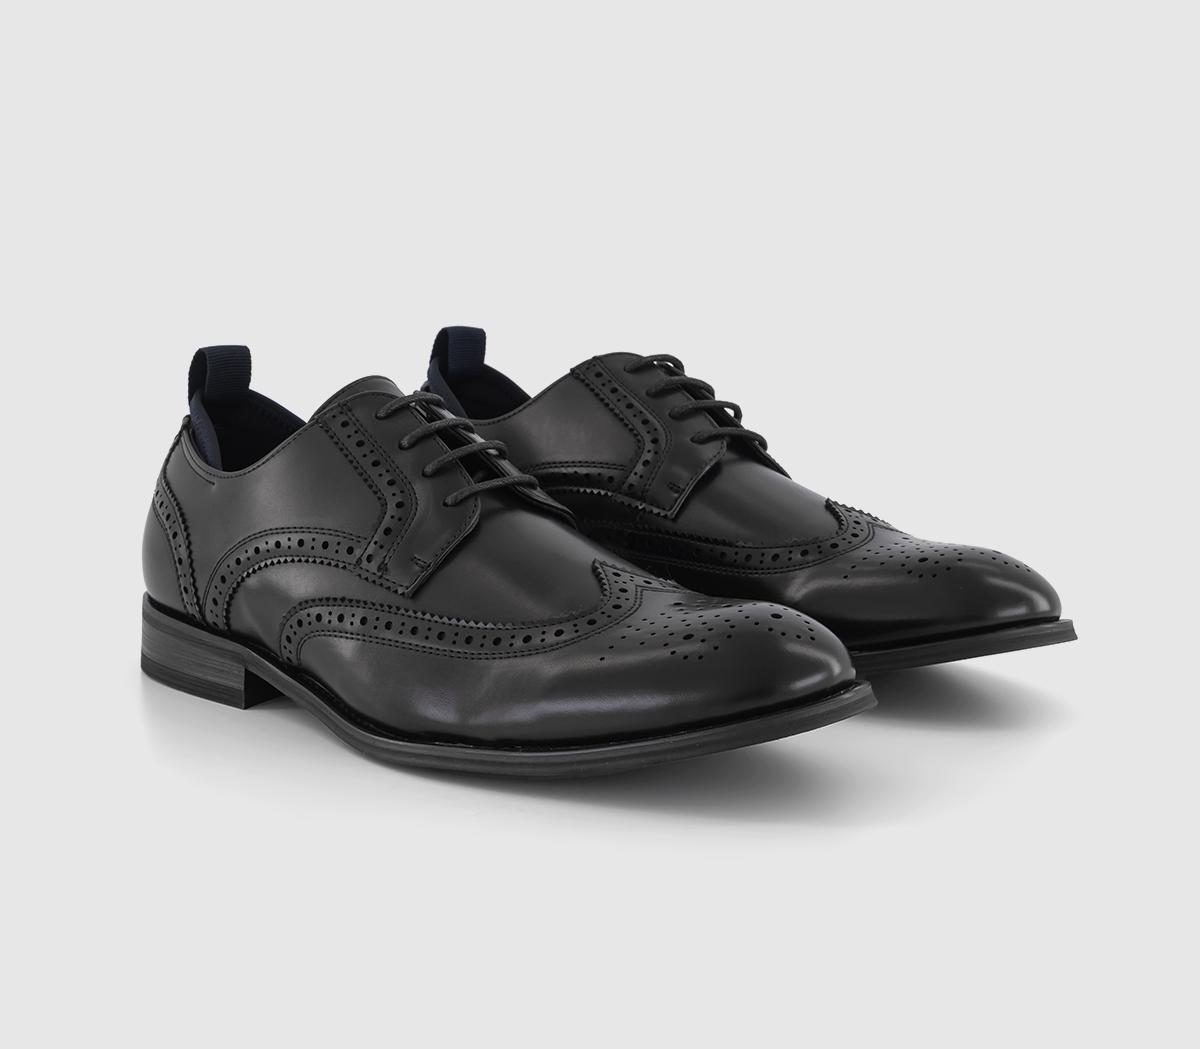 OFFICE Mens Montgomery Brogue Derby Shoes Black, 7